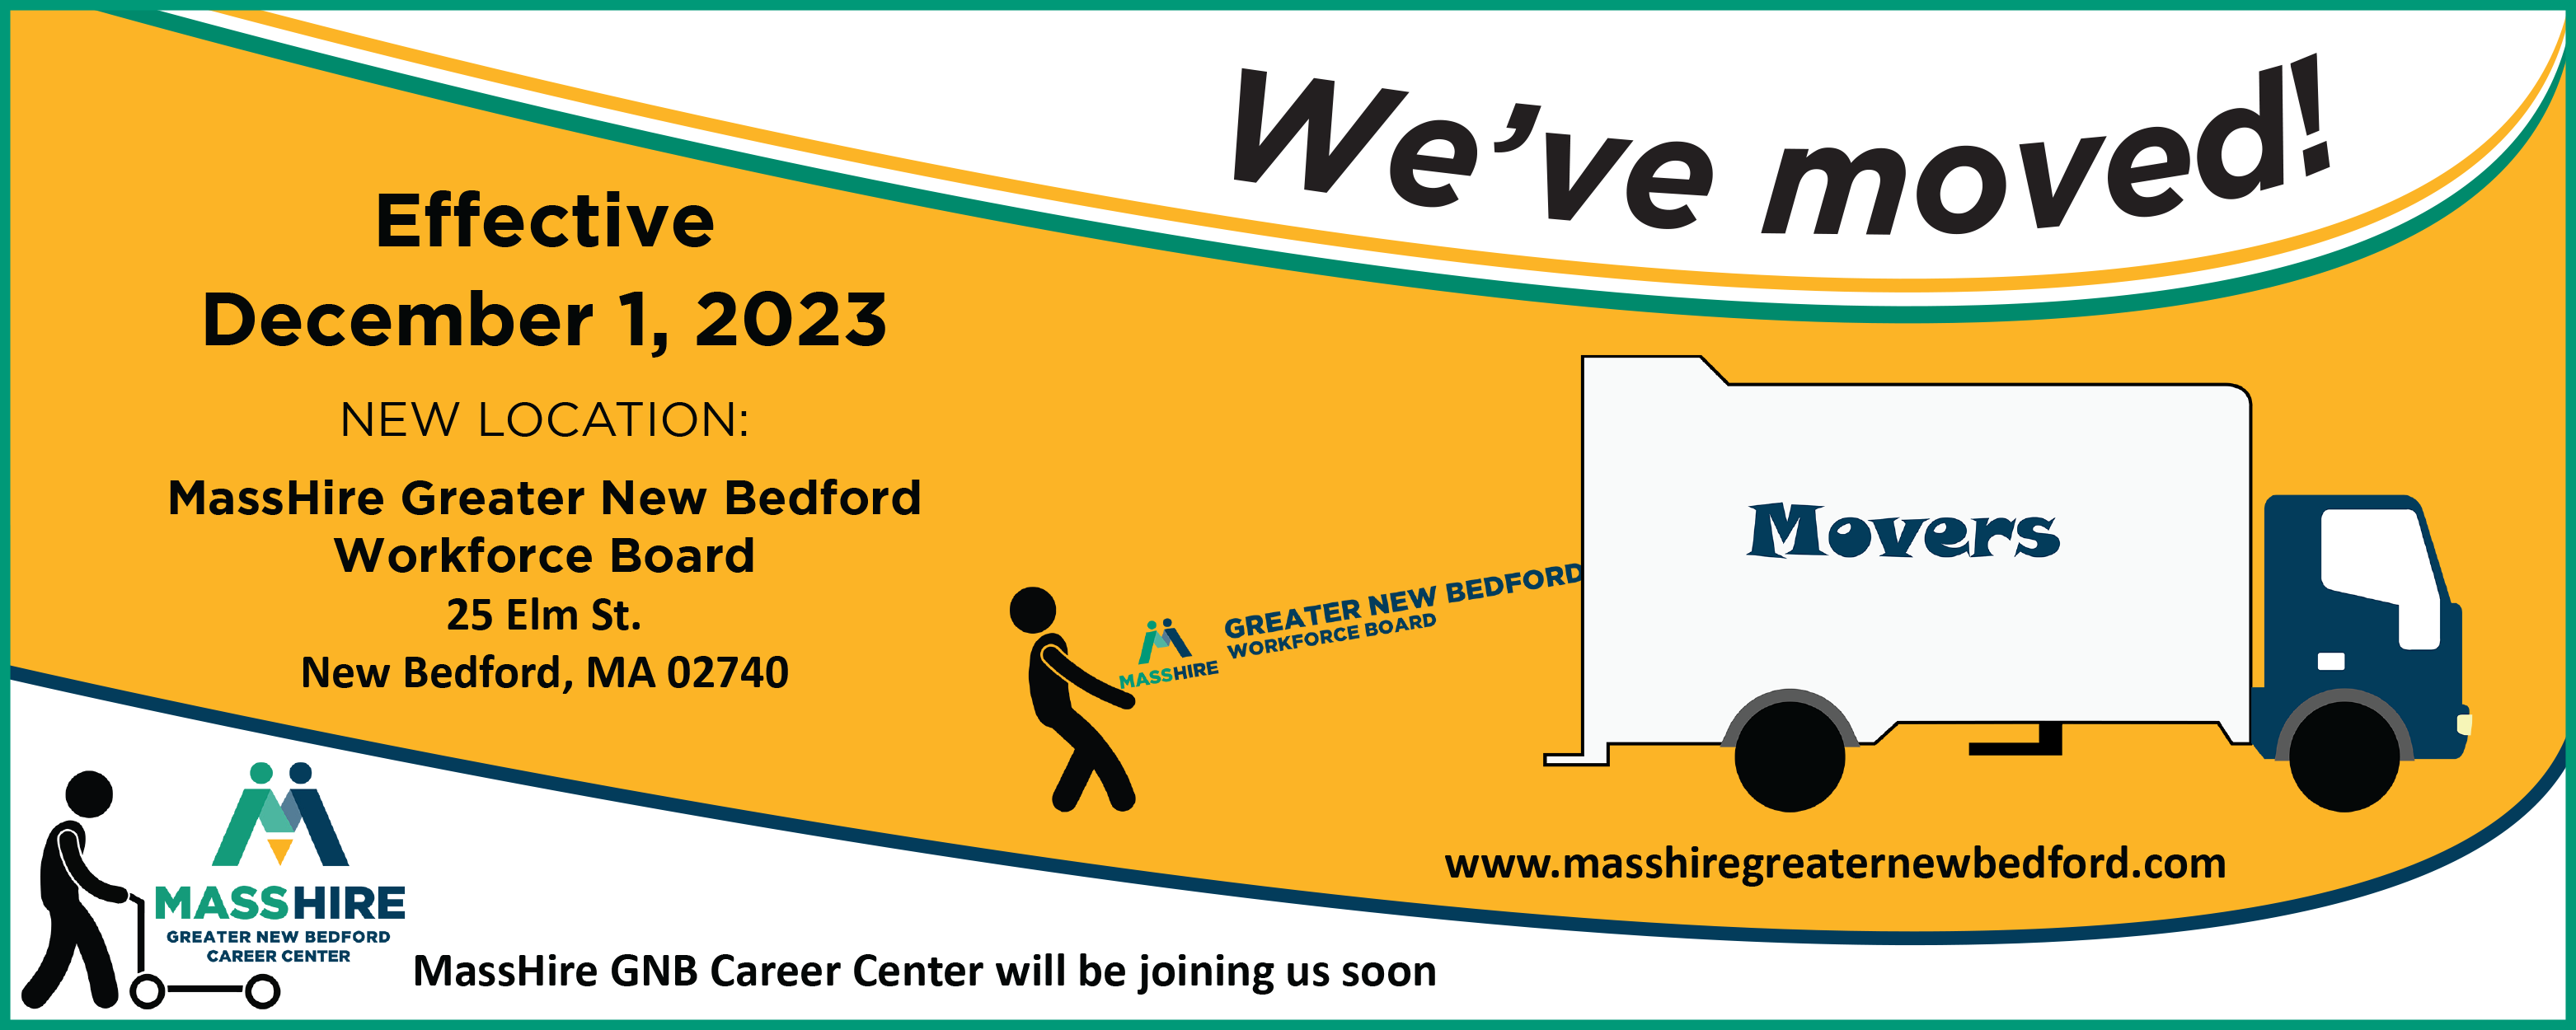 We have moved to 25 Elm Street, New Bedford, MA 02740